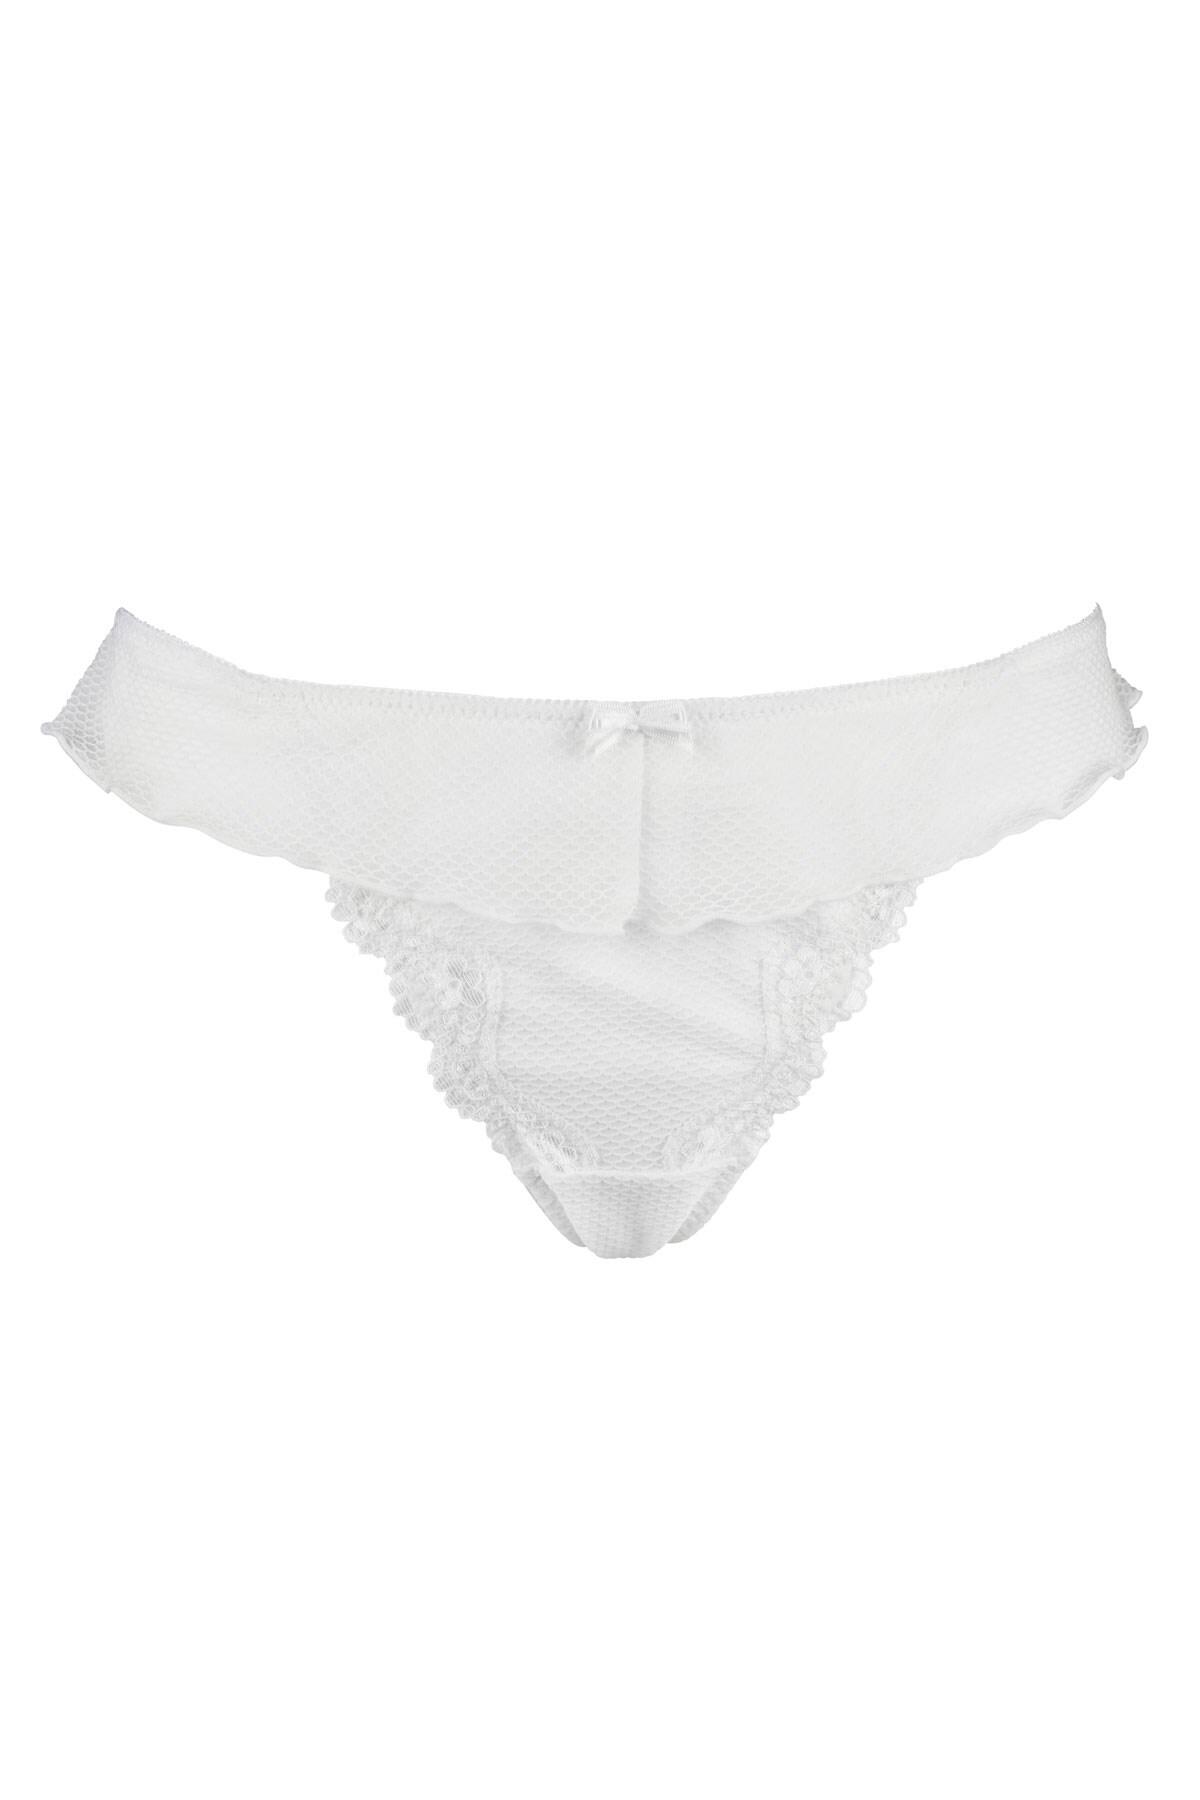 Ditto Skirted Thong | Pour Moi | Ditto Skirted Thong | White | Pour Moi